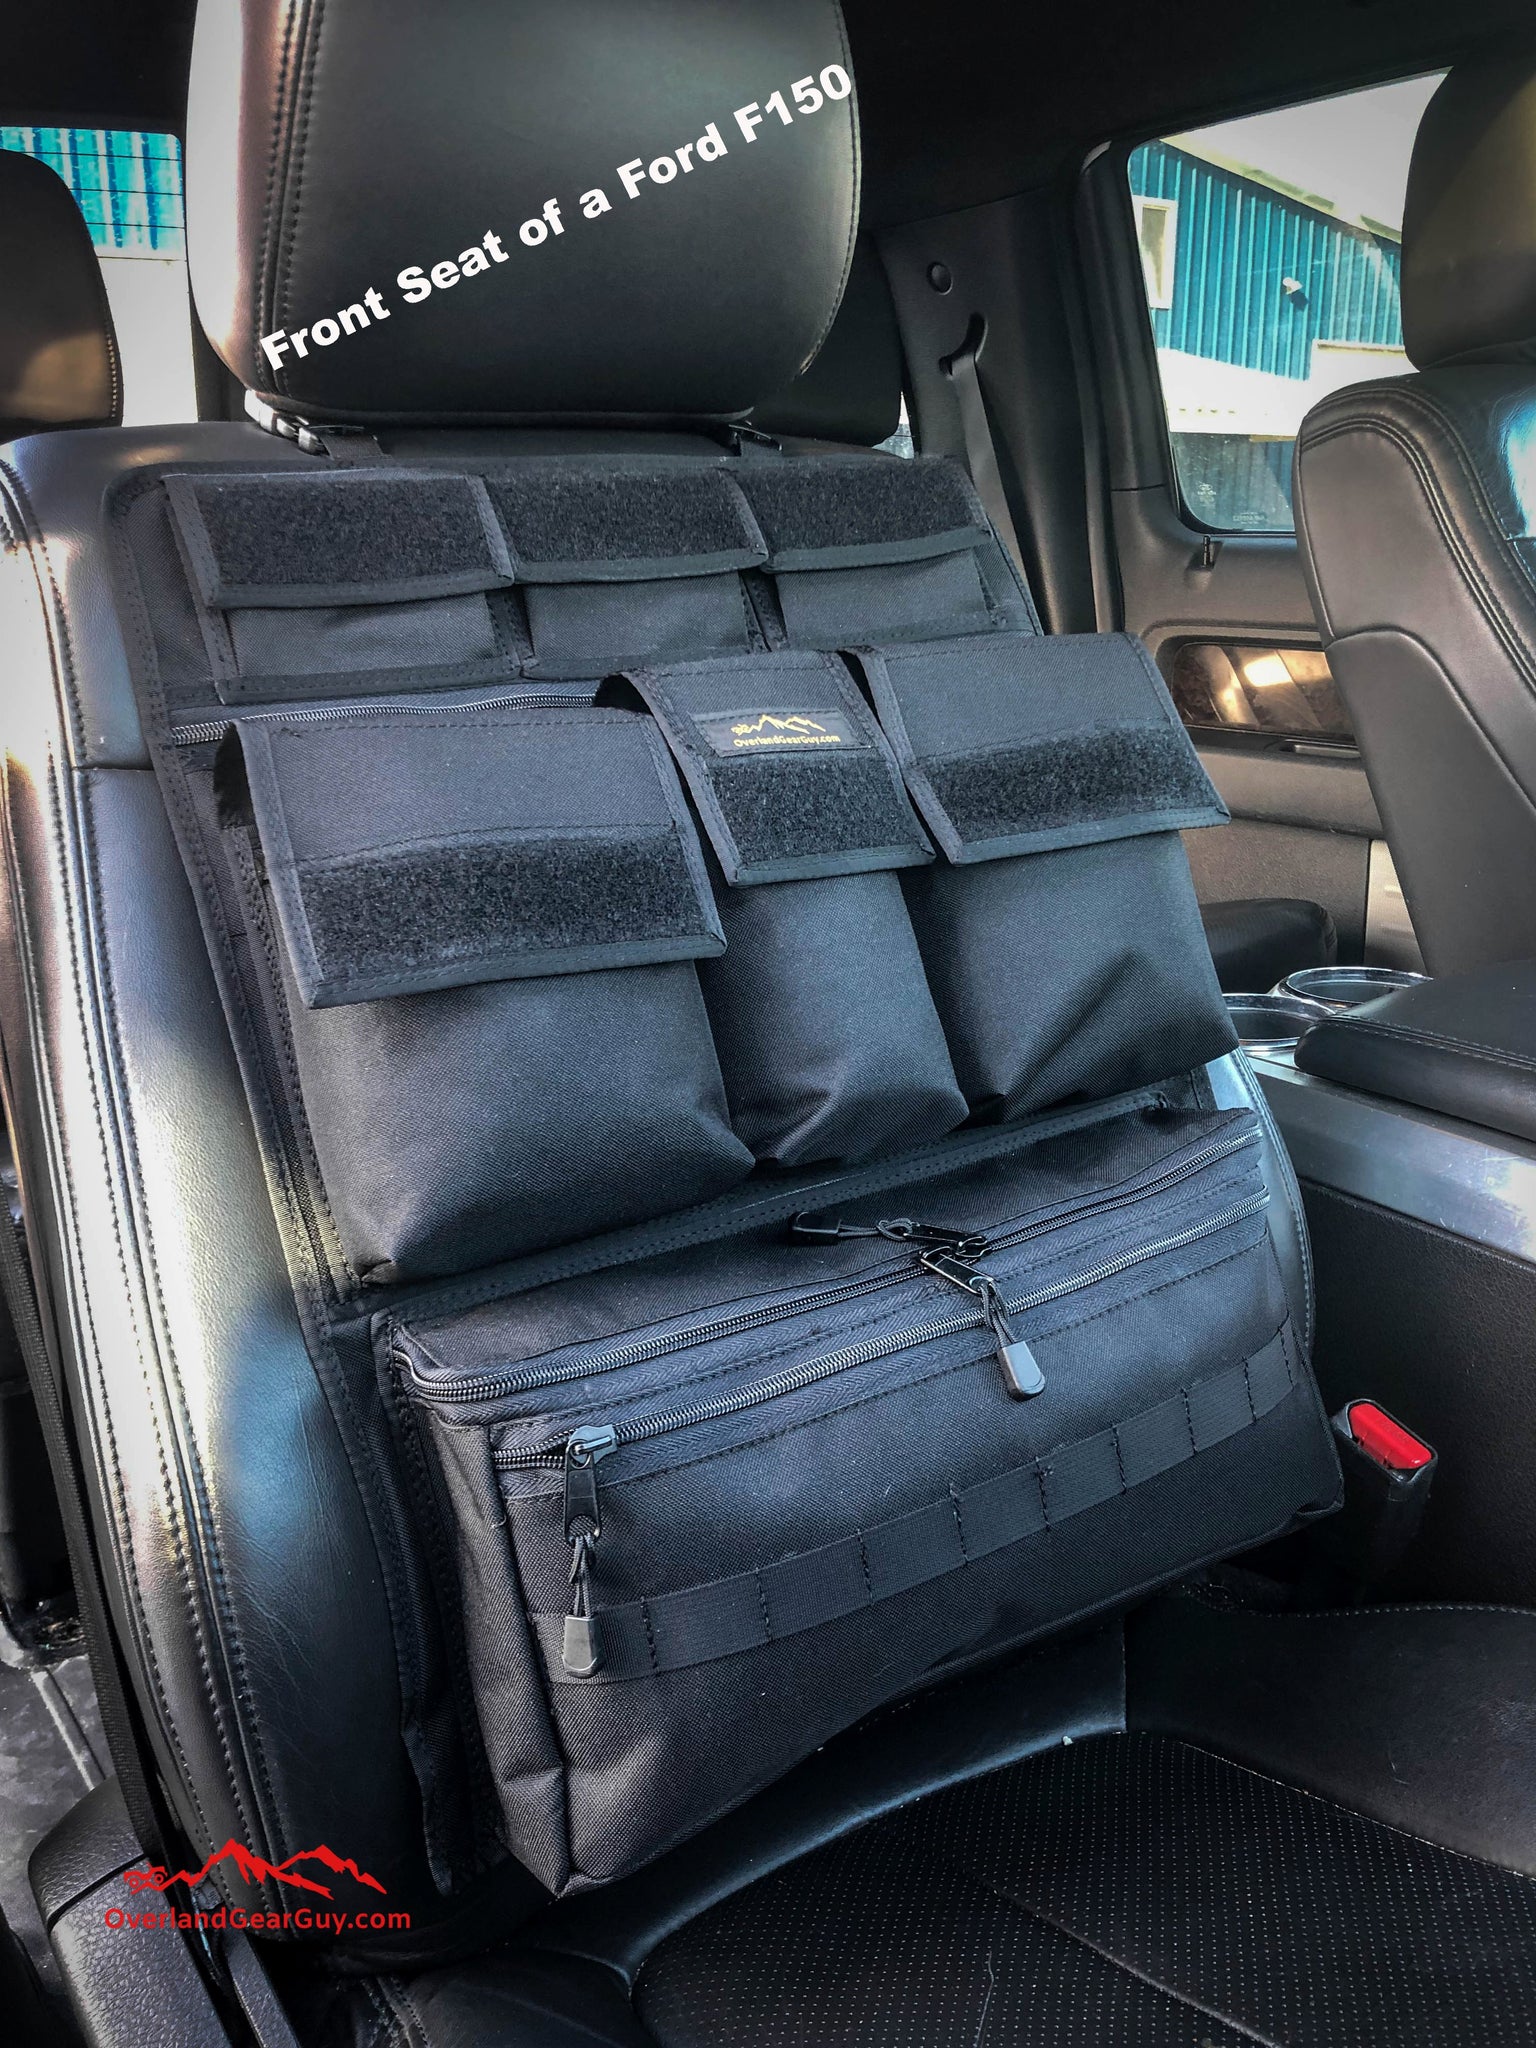 SeatDreamzzz airline seatback organizer review - The Gadgeteer